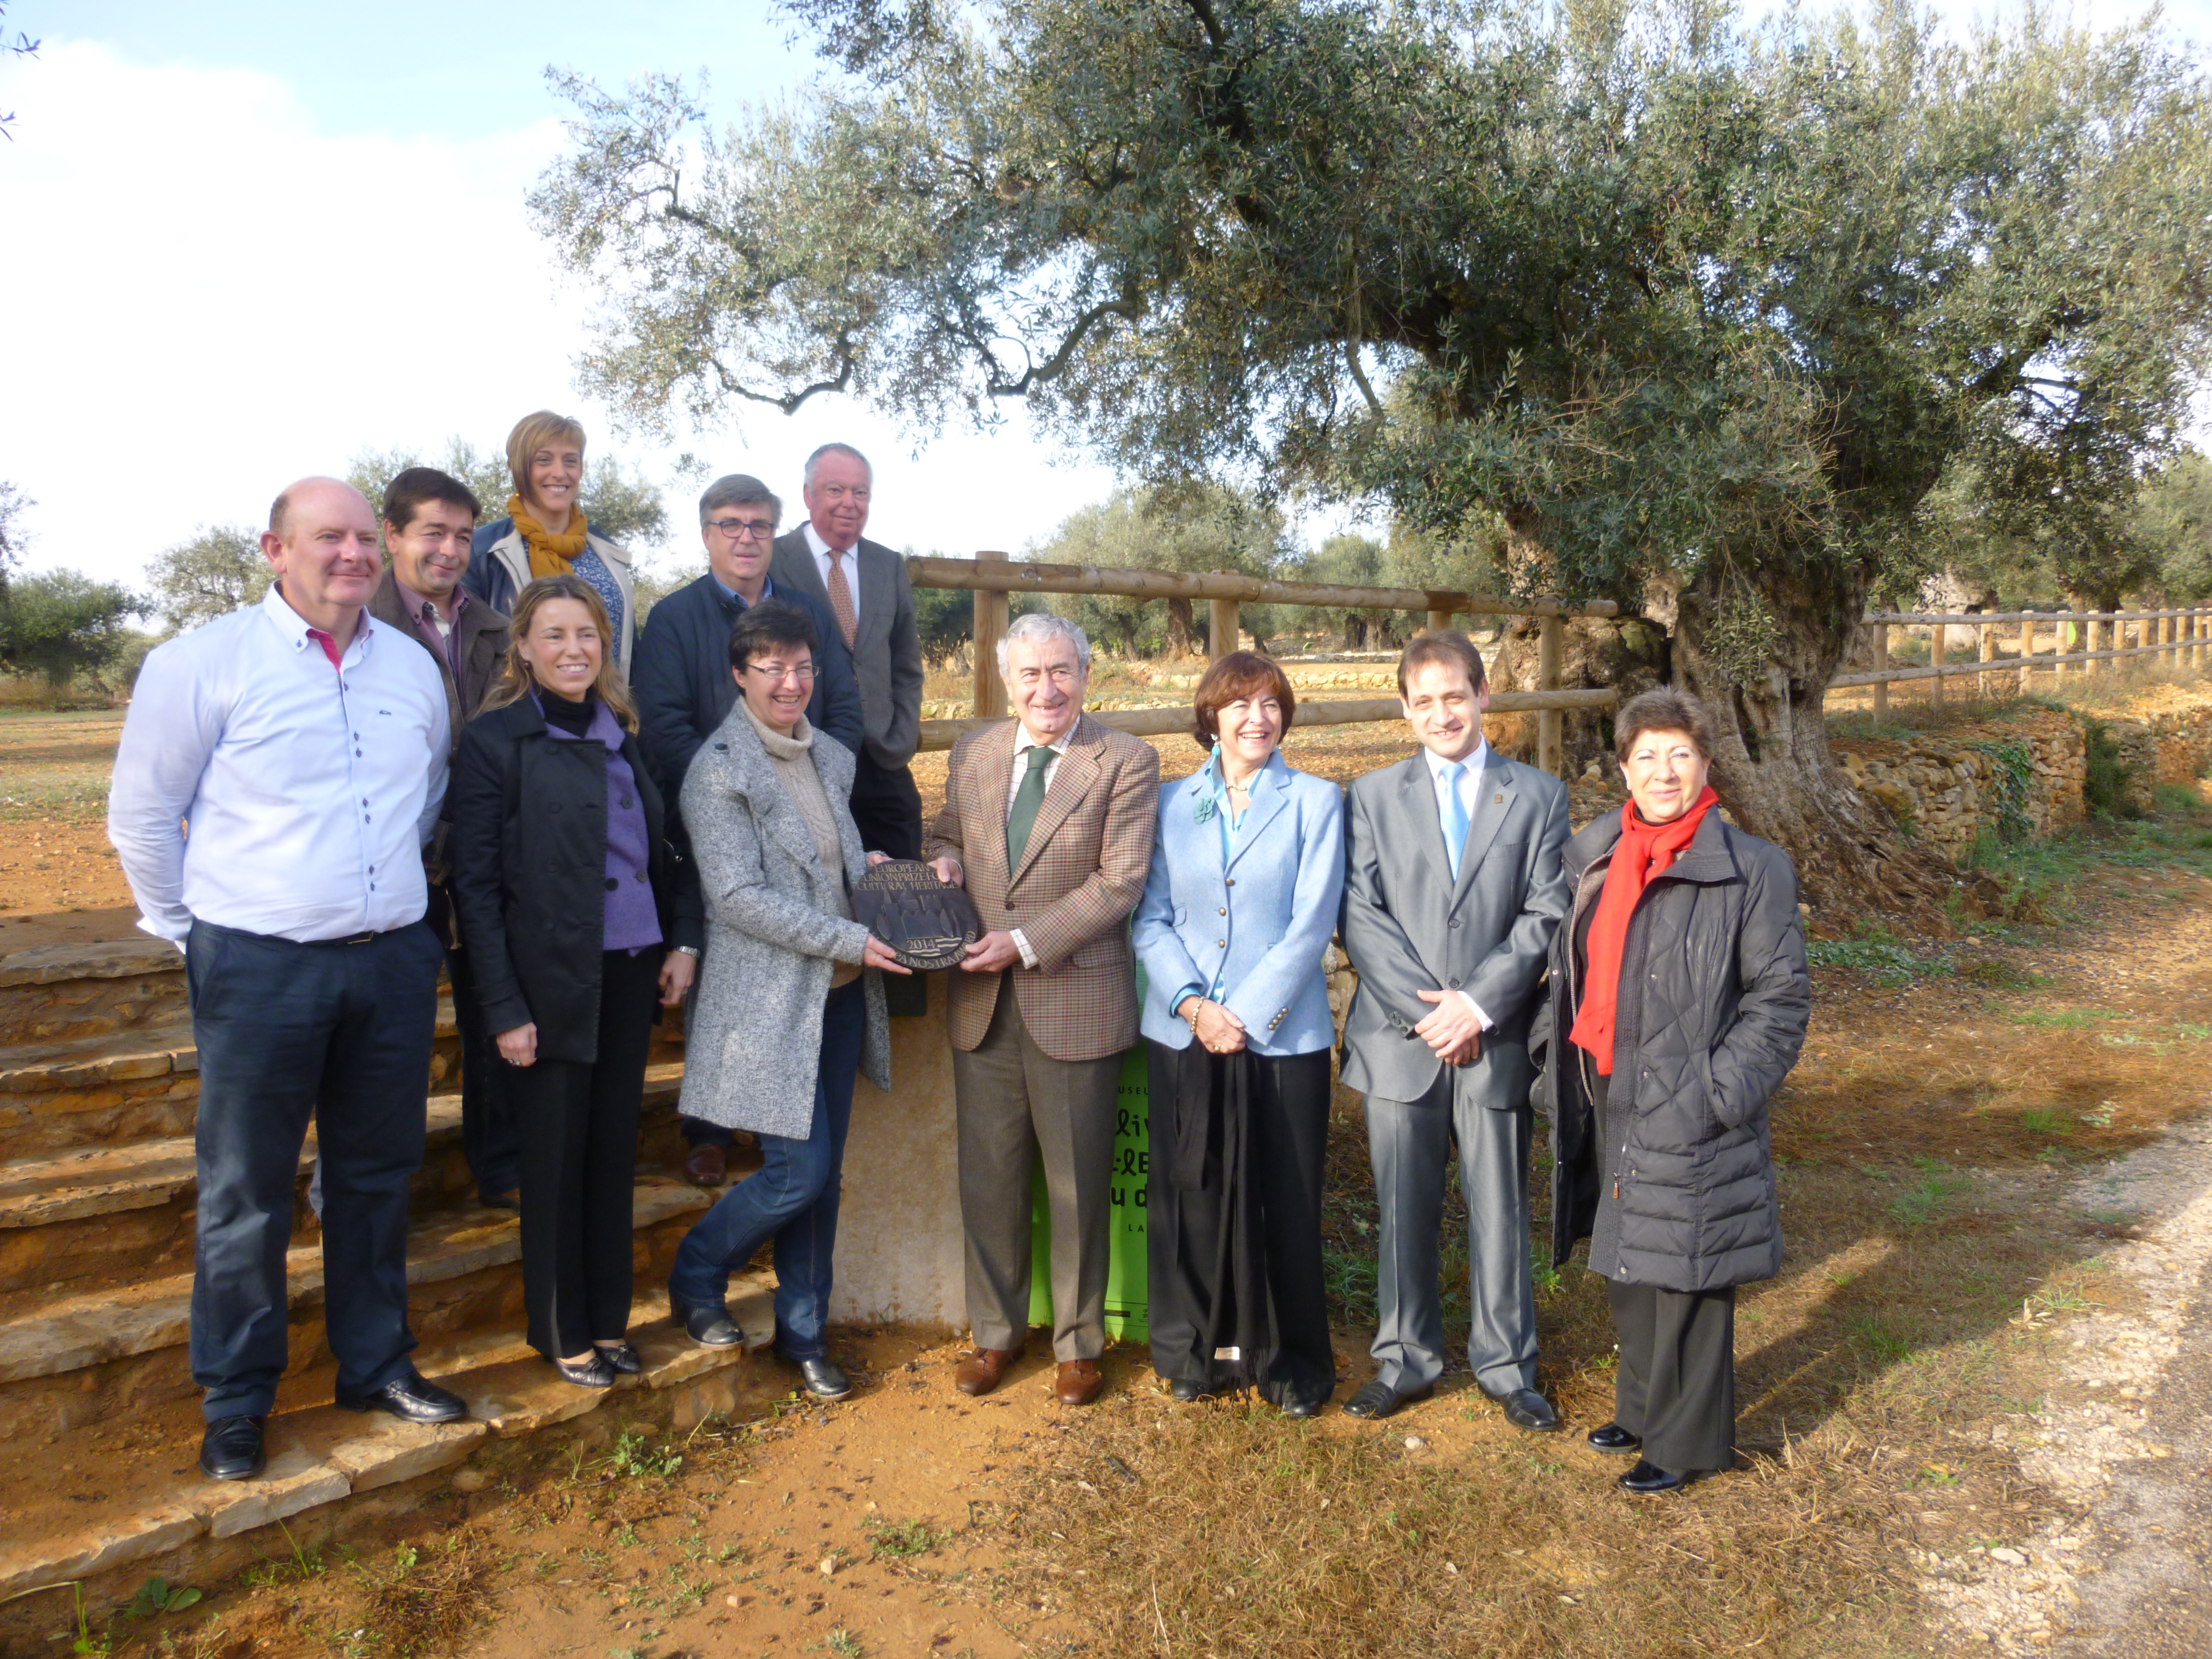 Group photograph taken during the visit to the Olive Tree Museum of Mas Pou in La Jana. Photo: Courtesy of Taula del Senia Commonwealth